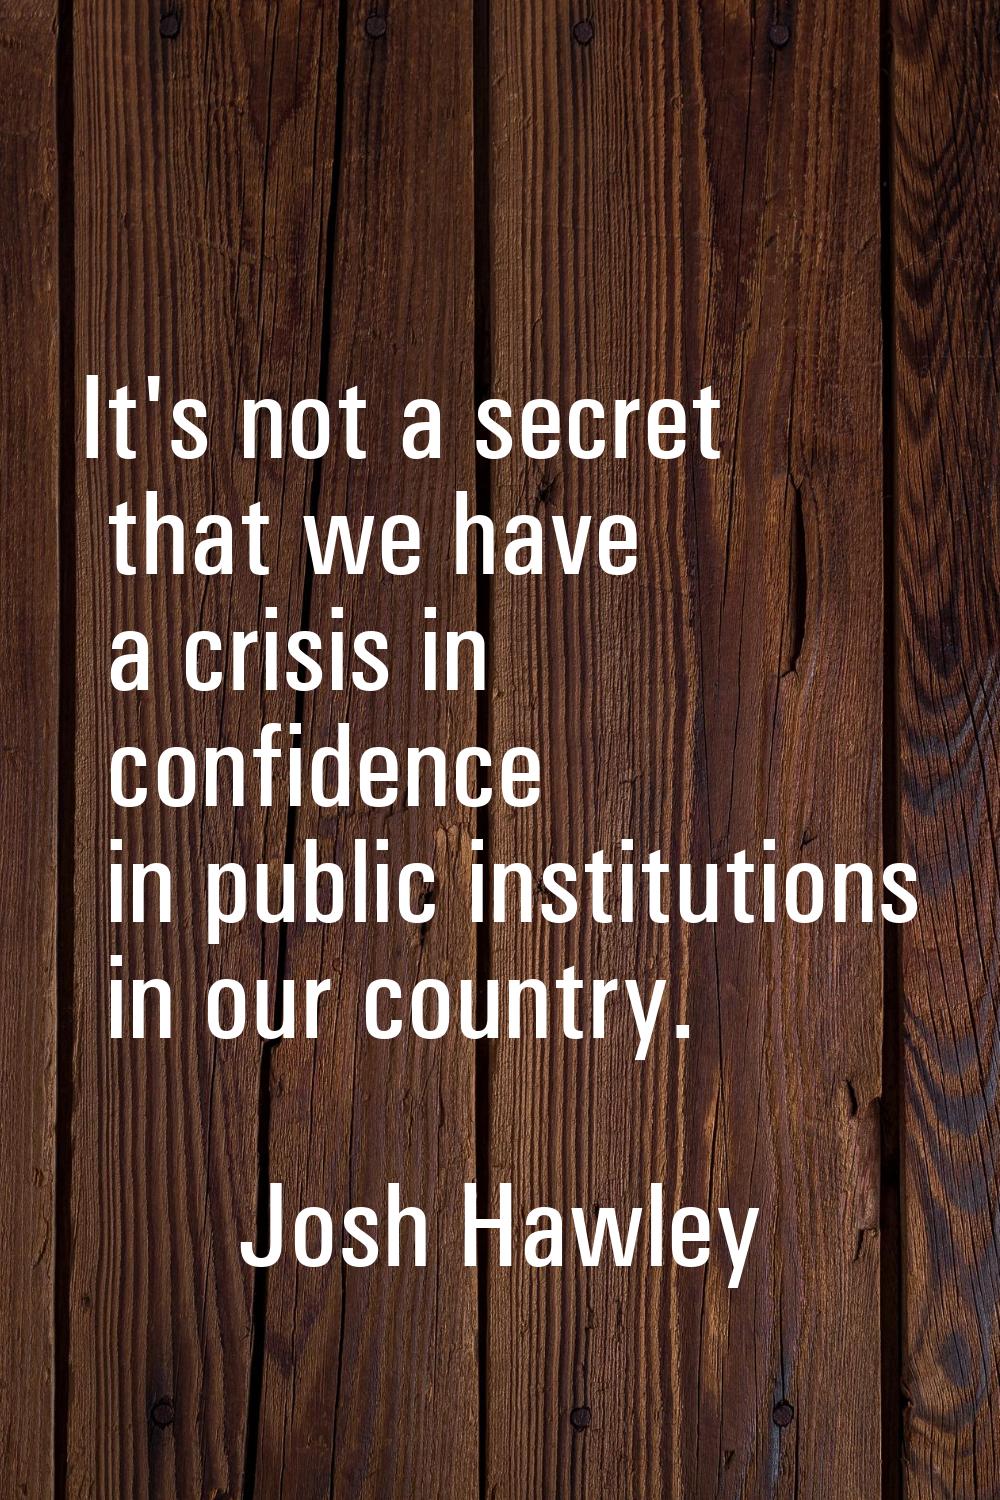 It's not a secret that we have a crisis in confidence in public institutions in our country.